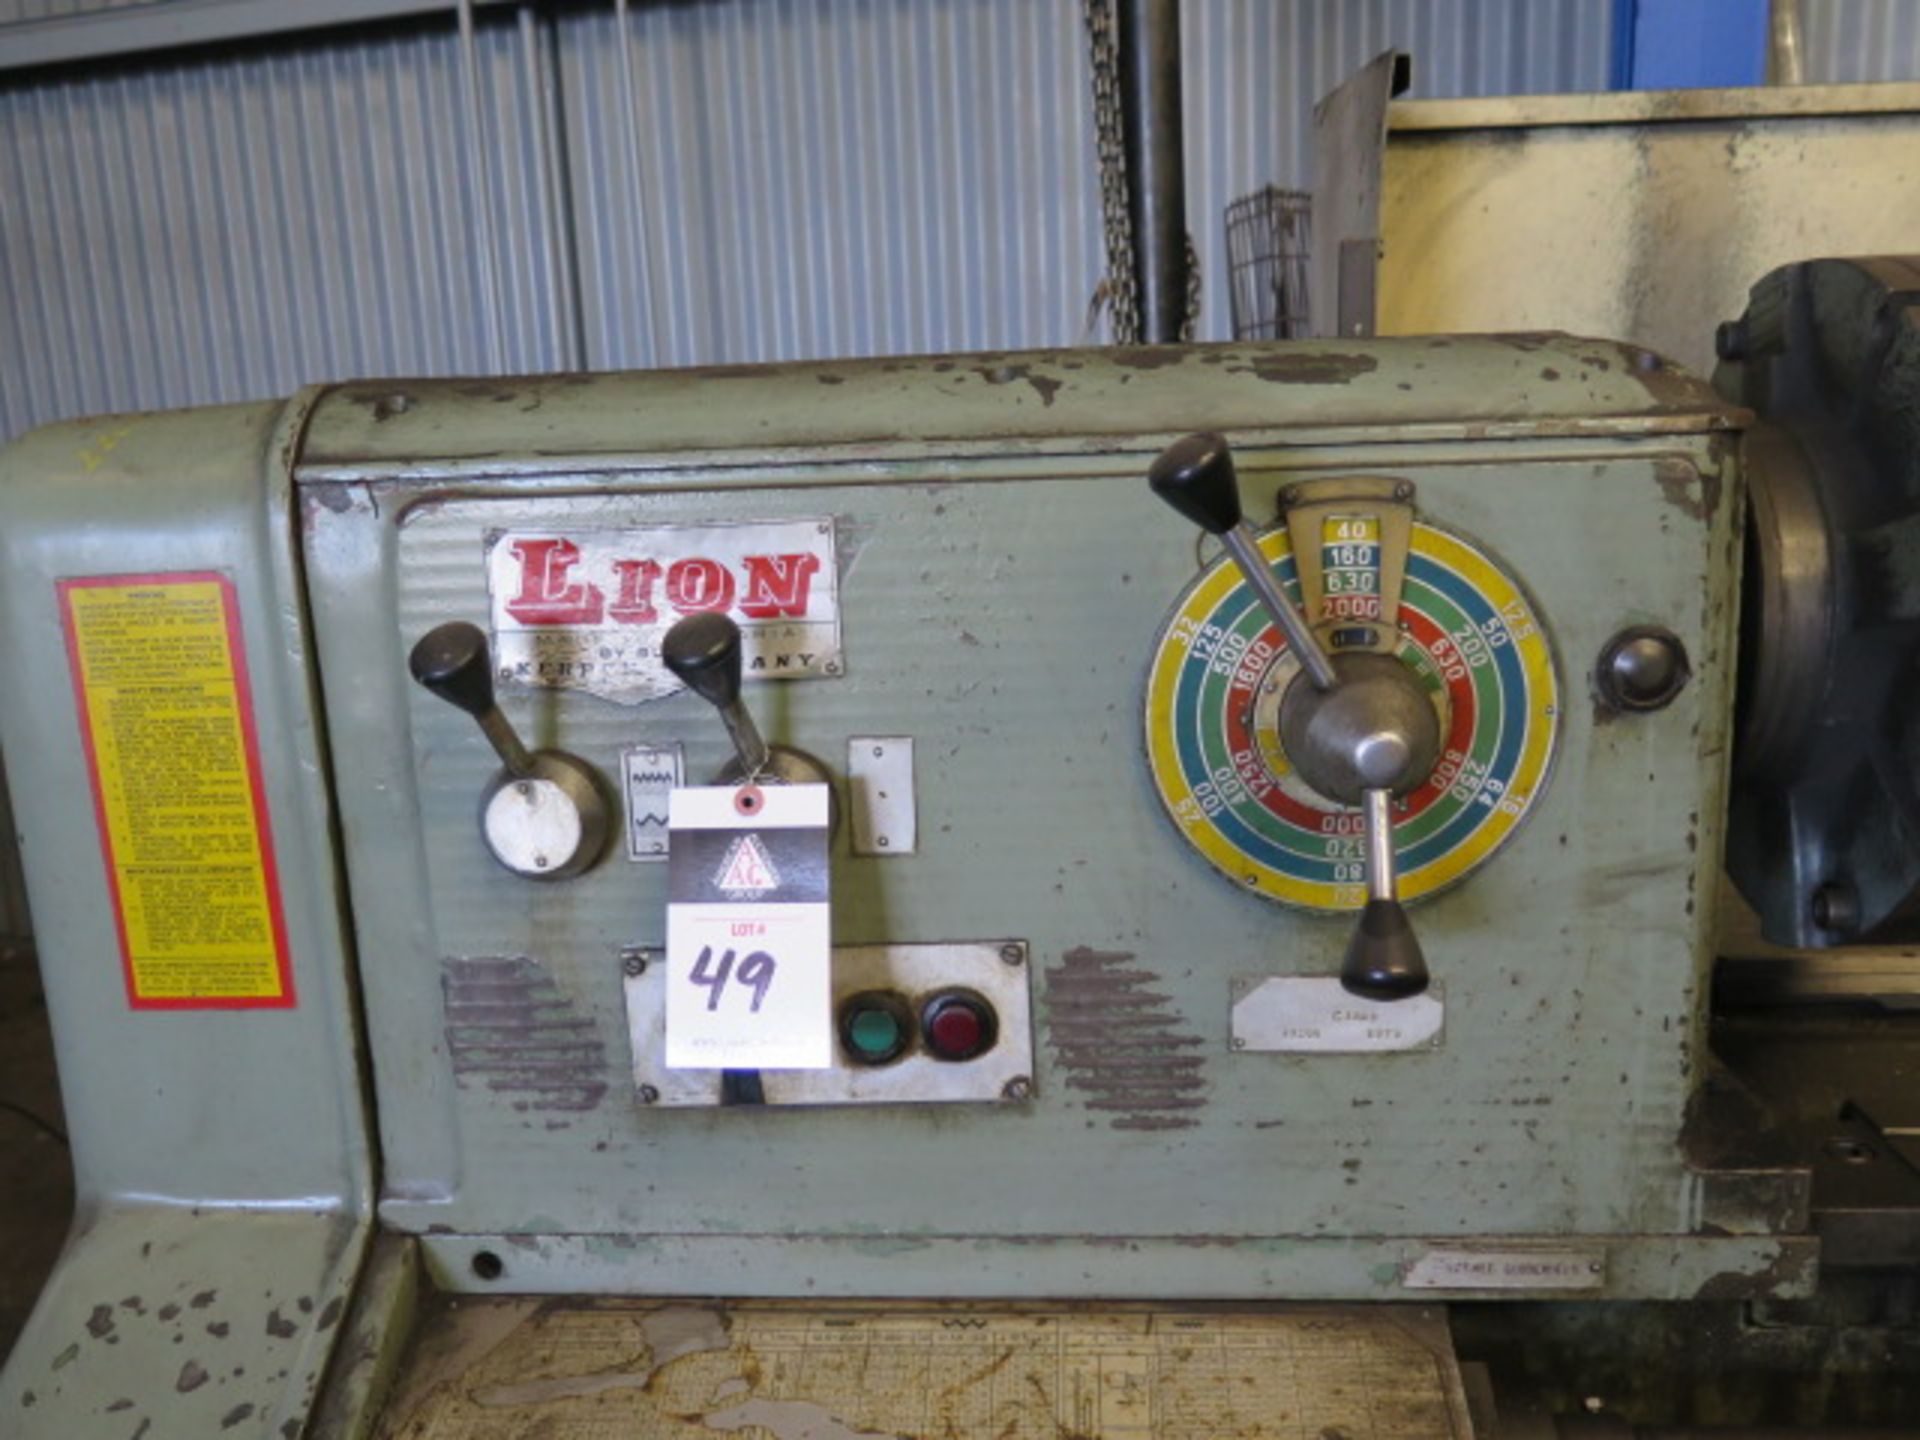 Lyon C10MB 22” x 64” Geared Head Gap Lathe s/n 10206 w/ 16-2000 RPM, 2 7/8” Spindle Bore, SOLD AS IS - Image 4 of 13